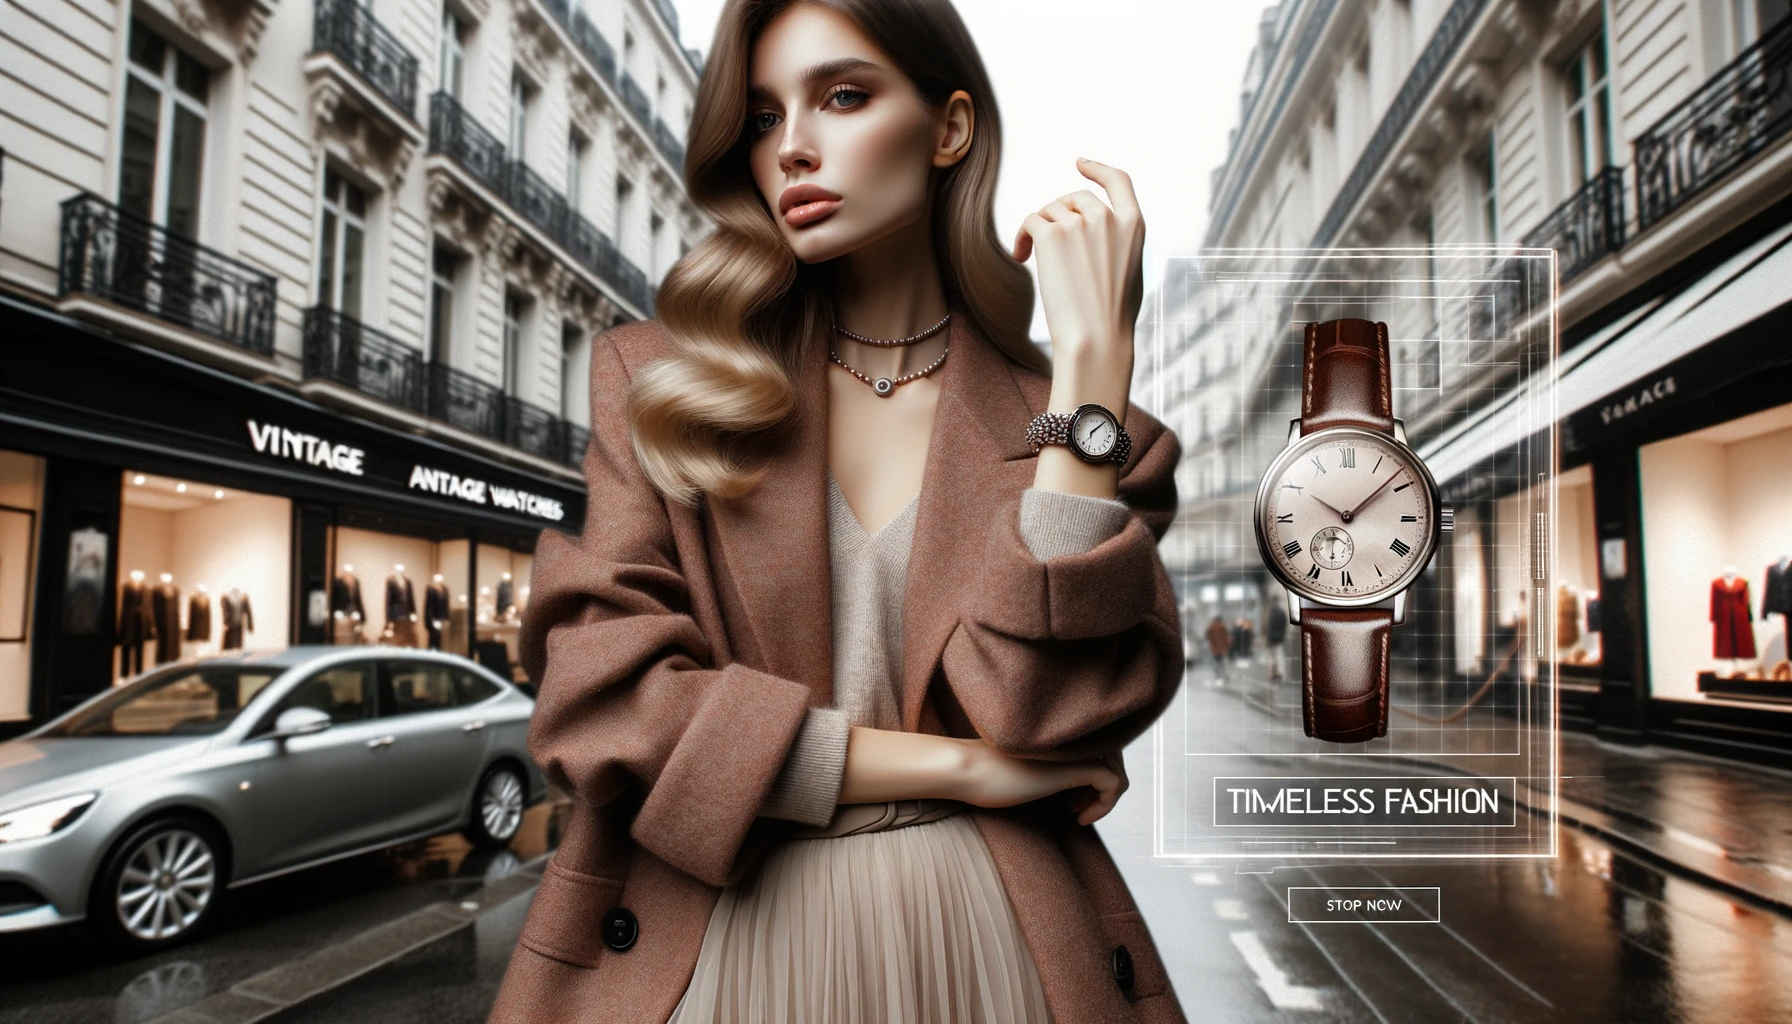 Wrist Watches: From Battlefield to Fashion Accessory - The New